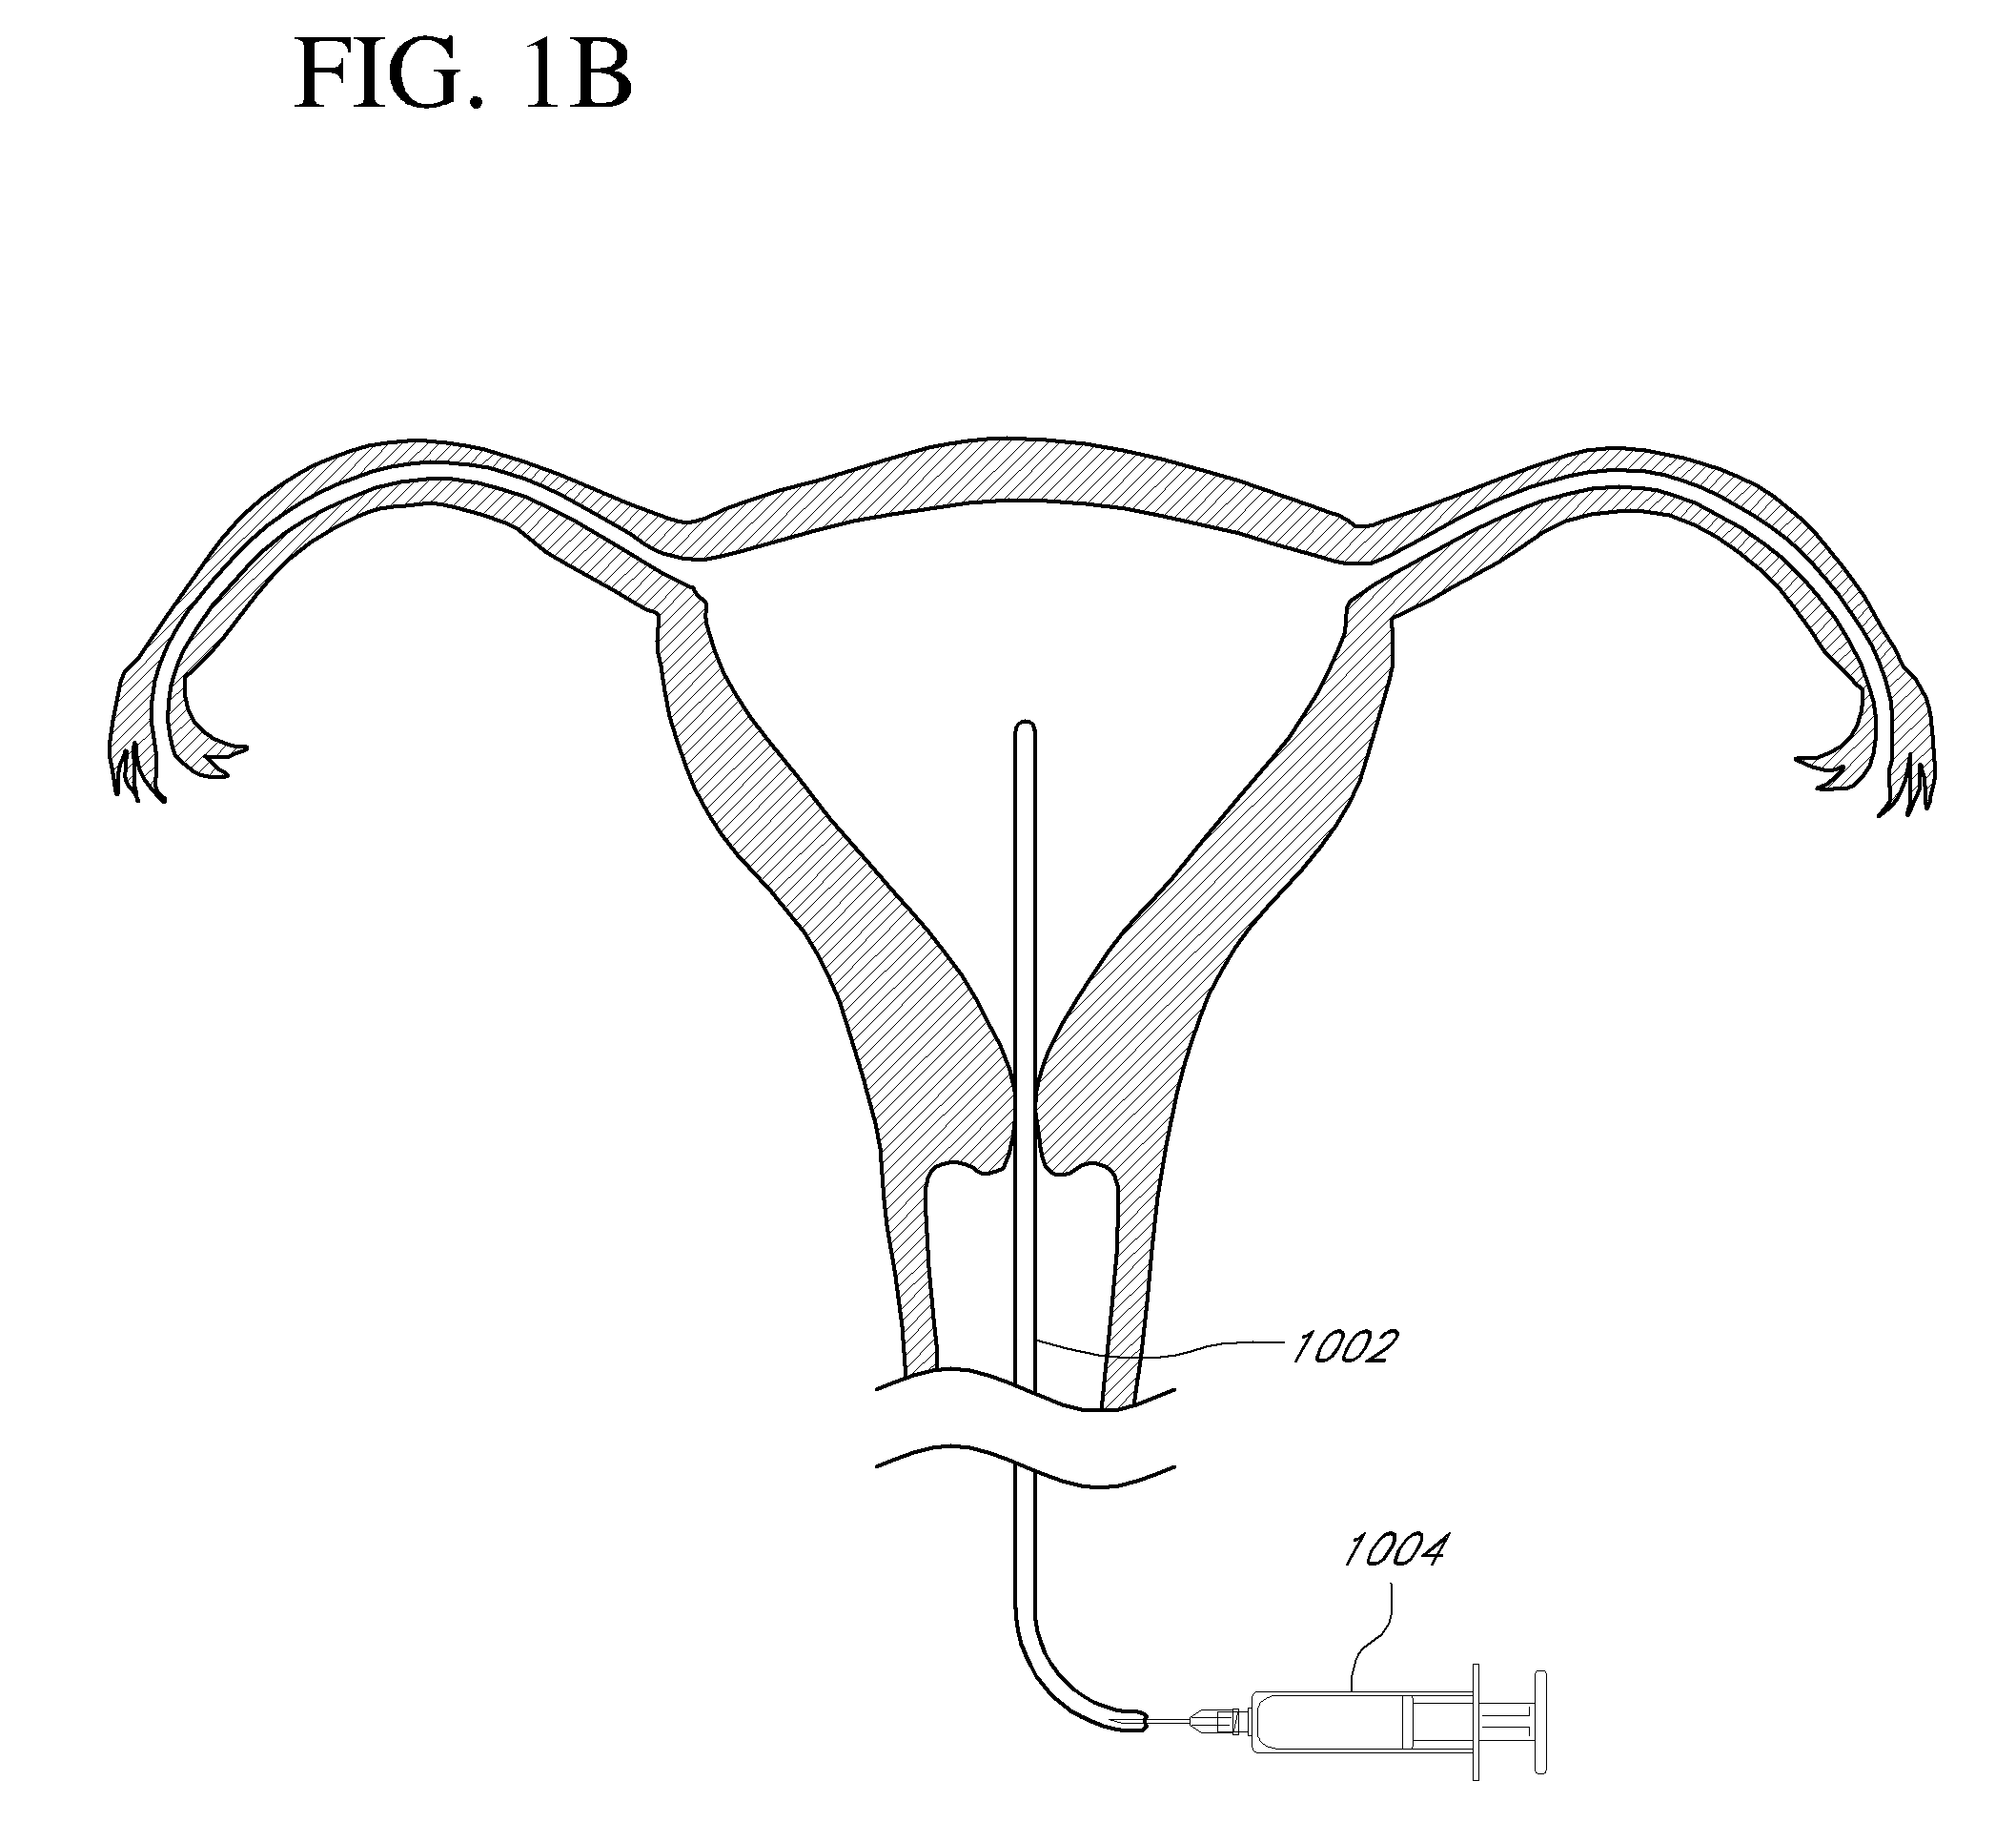 Systems, methods and devices for performing gynecological procedures